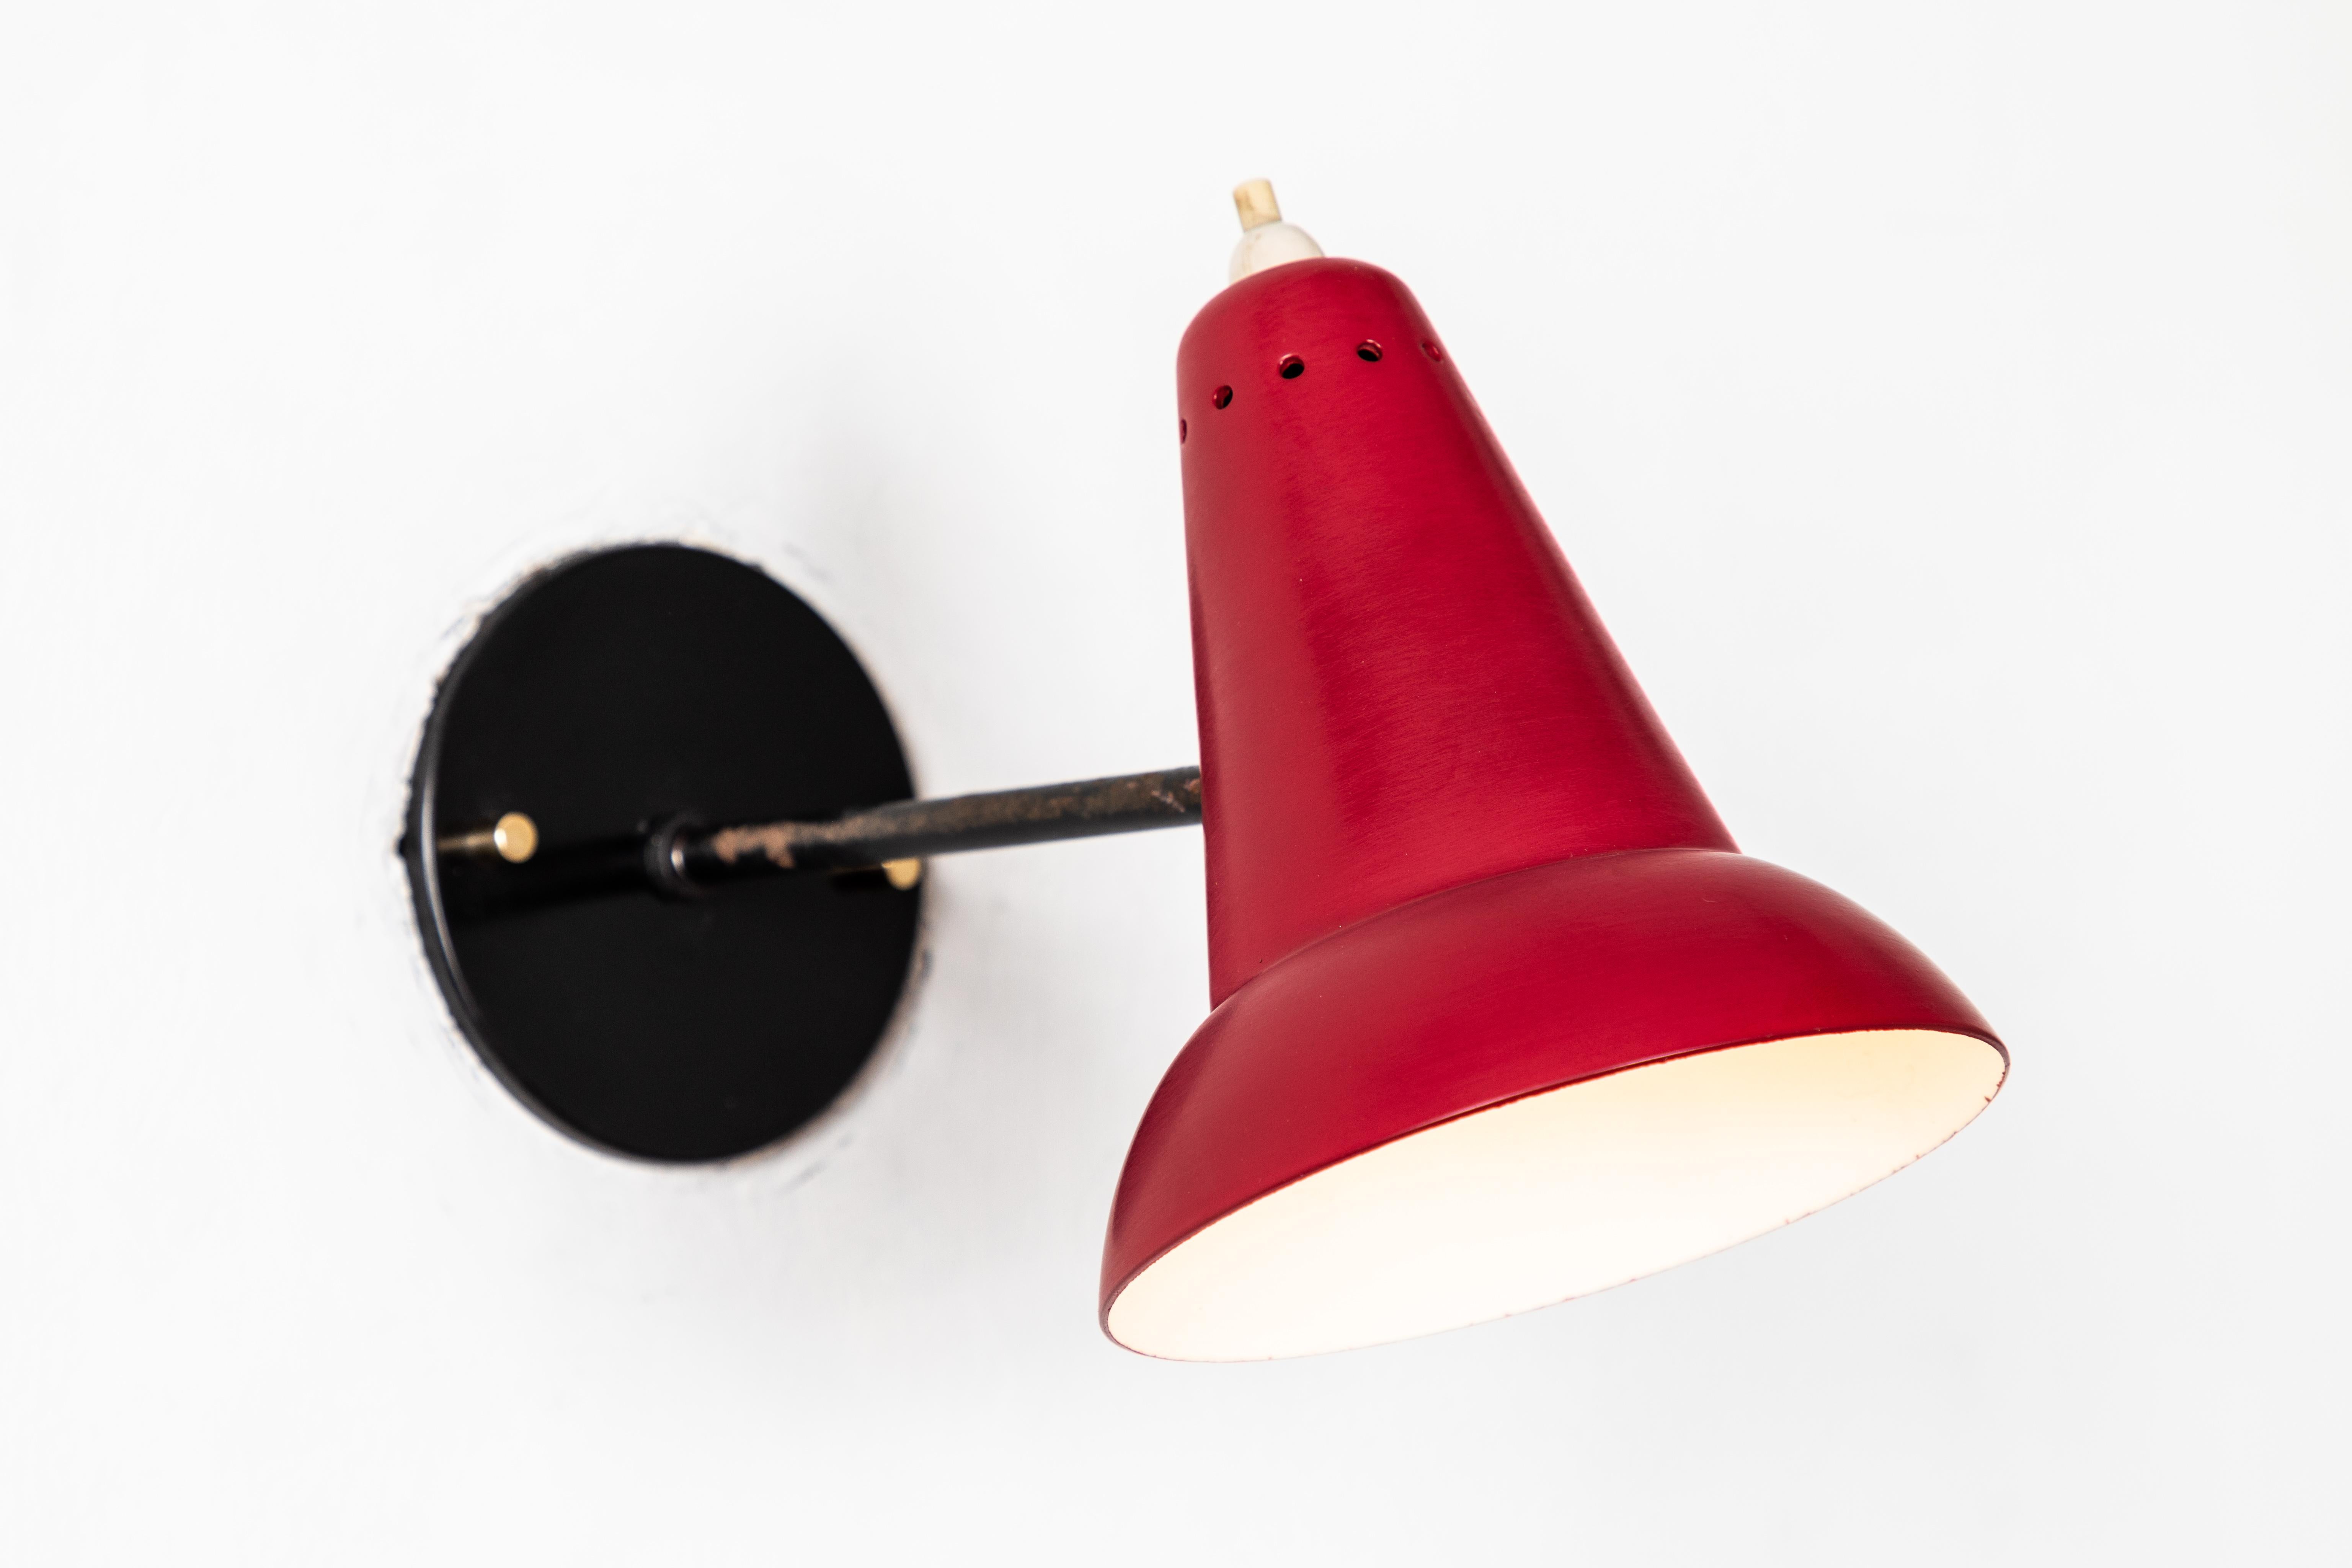 1950s Italian red articulating sconces attributed to Gino Sarfatti. Executed in brass and red painted aluminum. Sconces pivot up/down and left/right on a ball joint. Custom black backplates with brass hardware for hardwiring mounting over standard